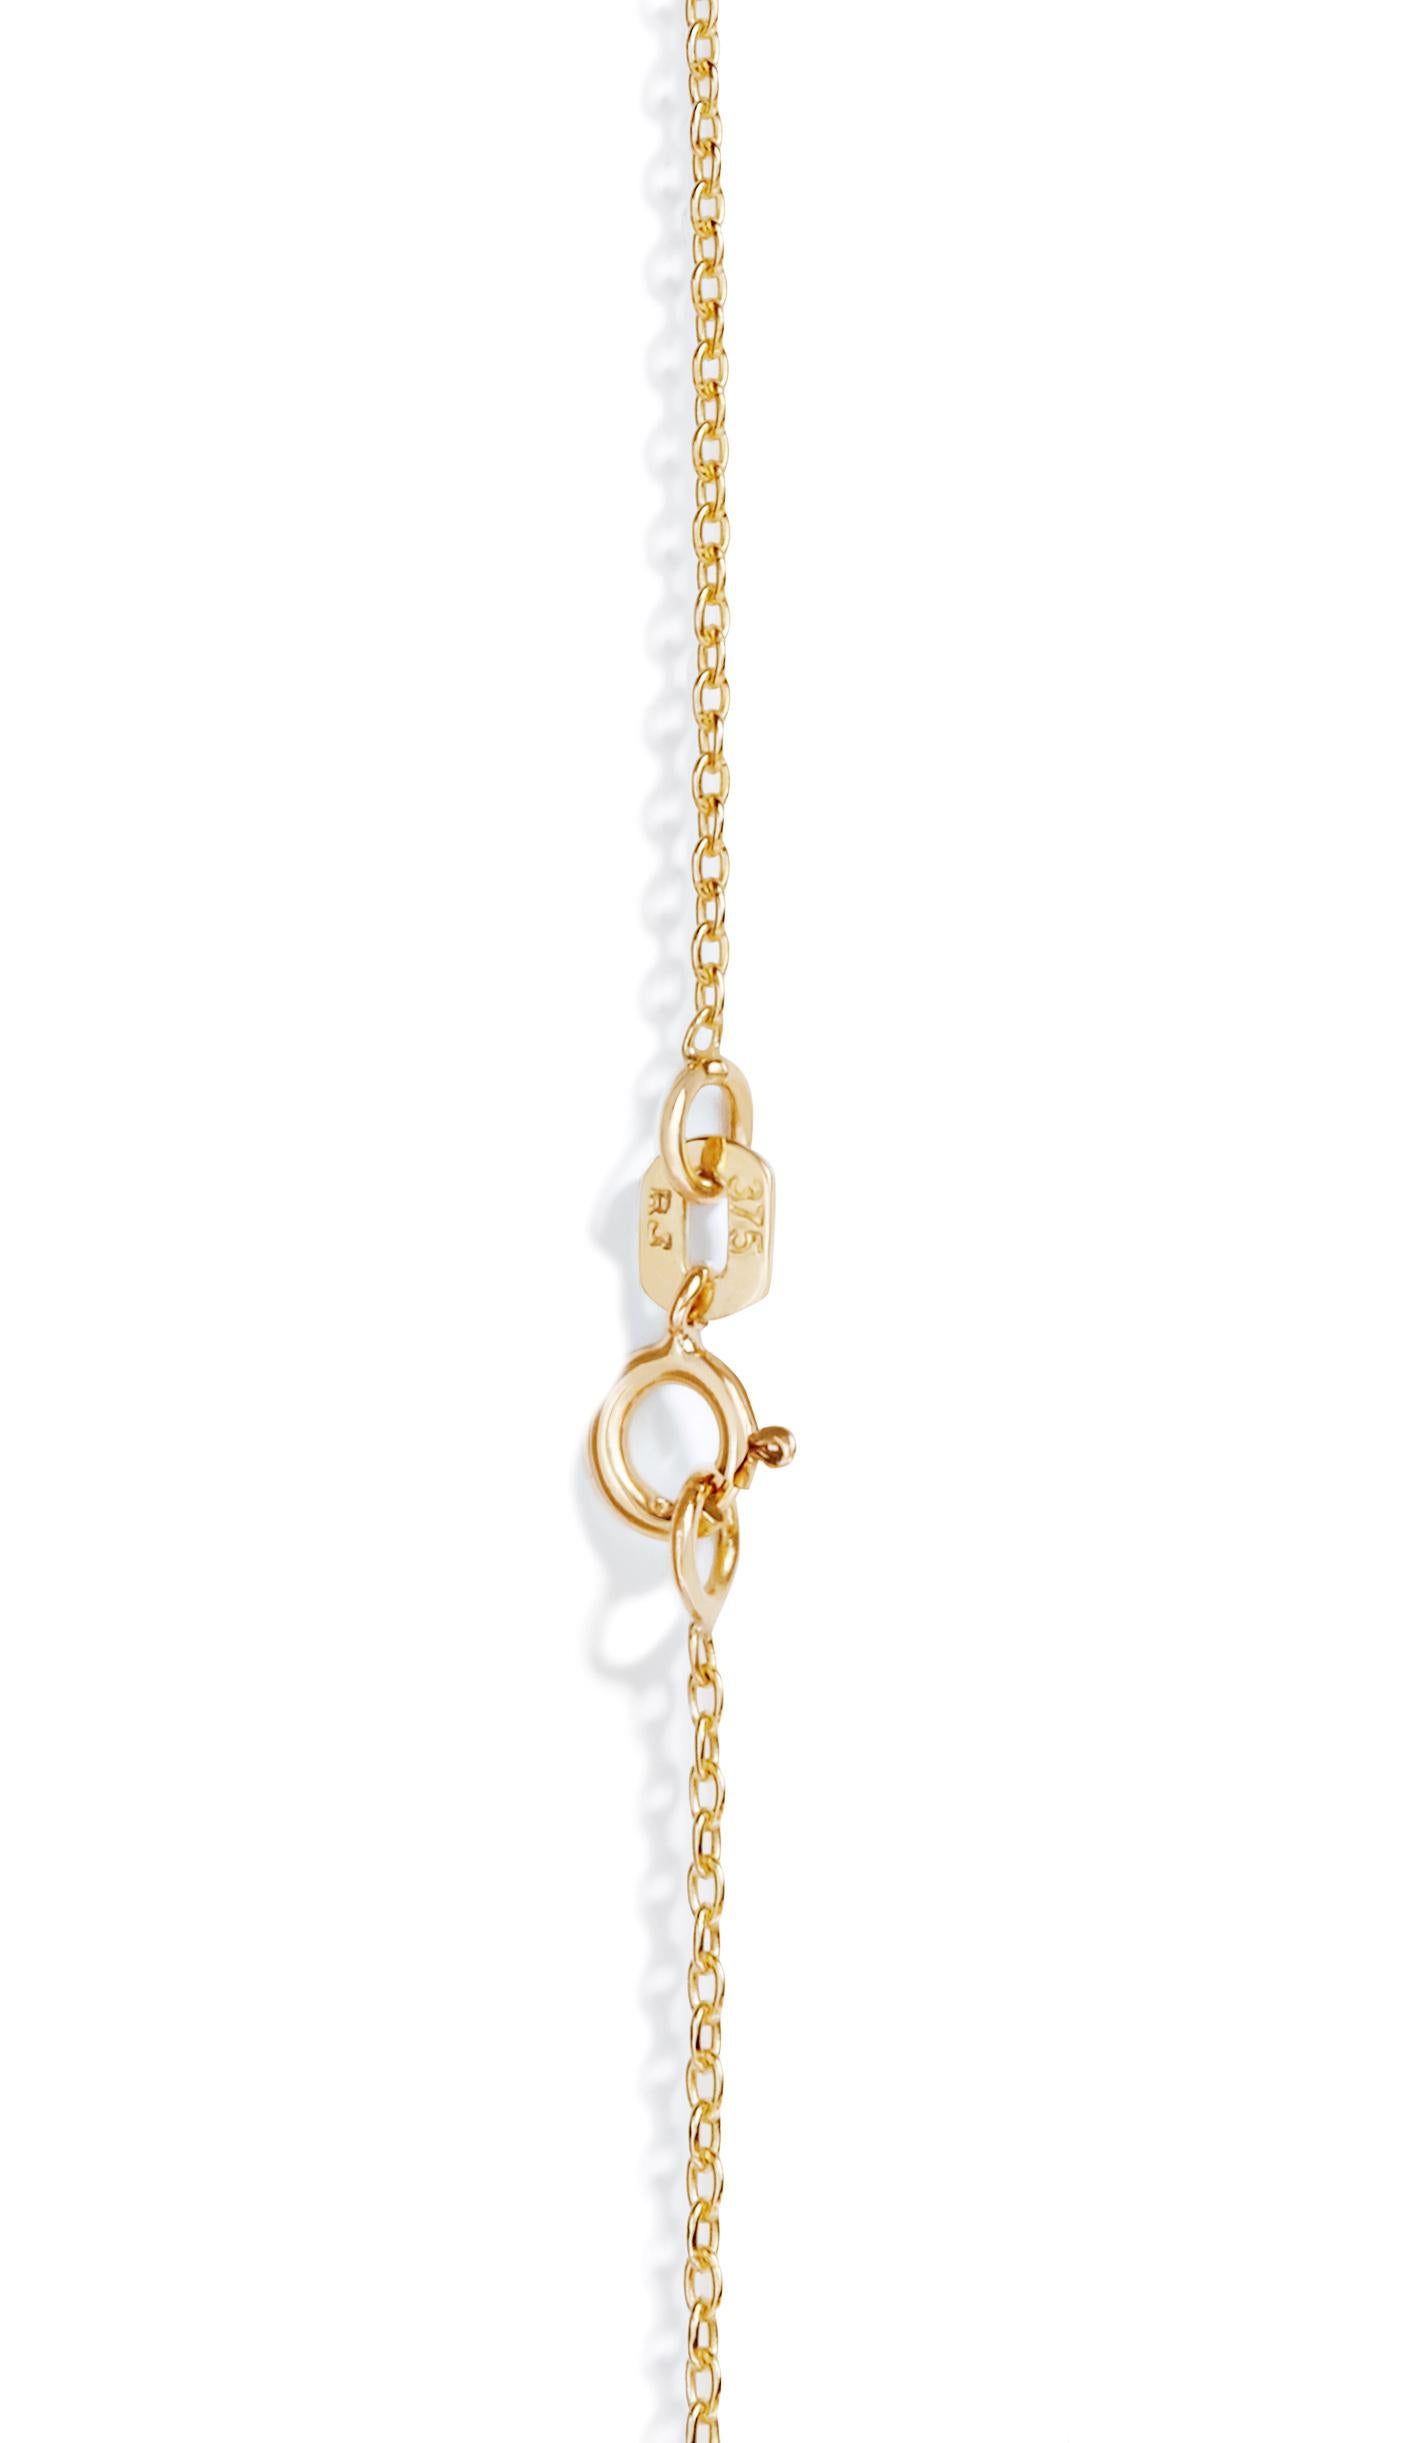 Split Disc Necklace in 9 Karat Yellow Gold by Allison Bryan In New Condition For Sale In London, GB